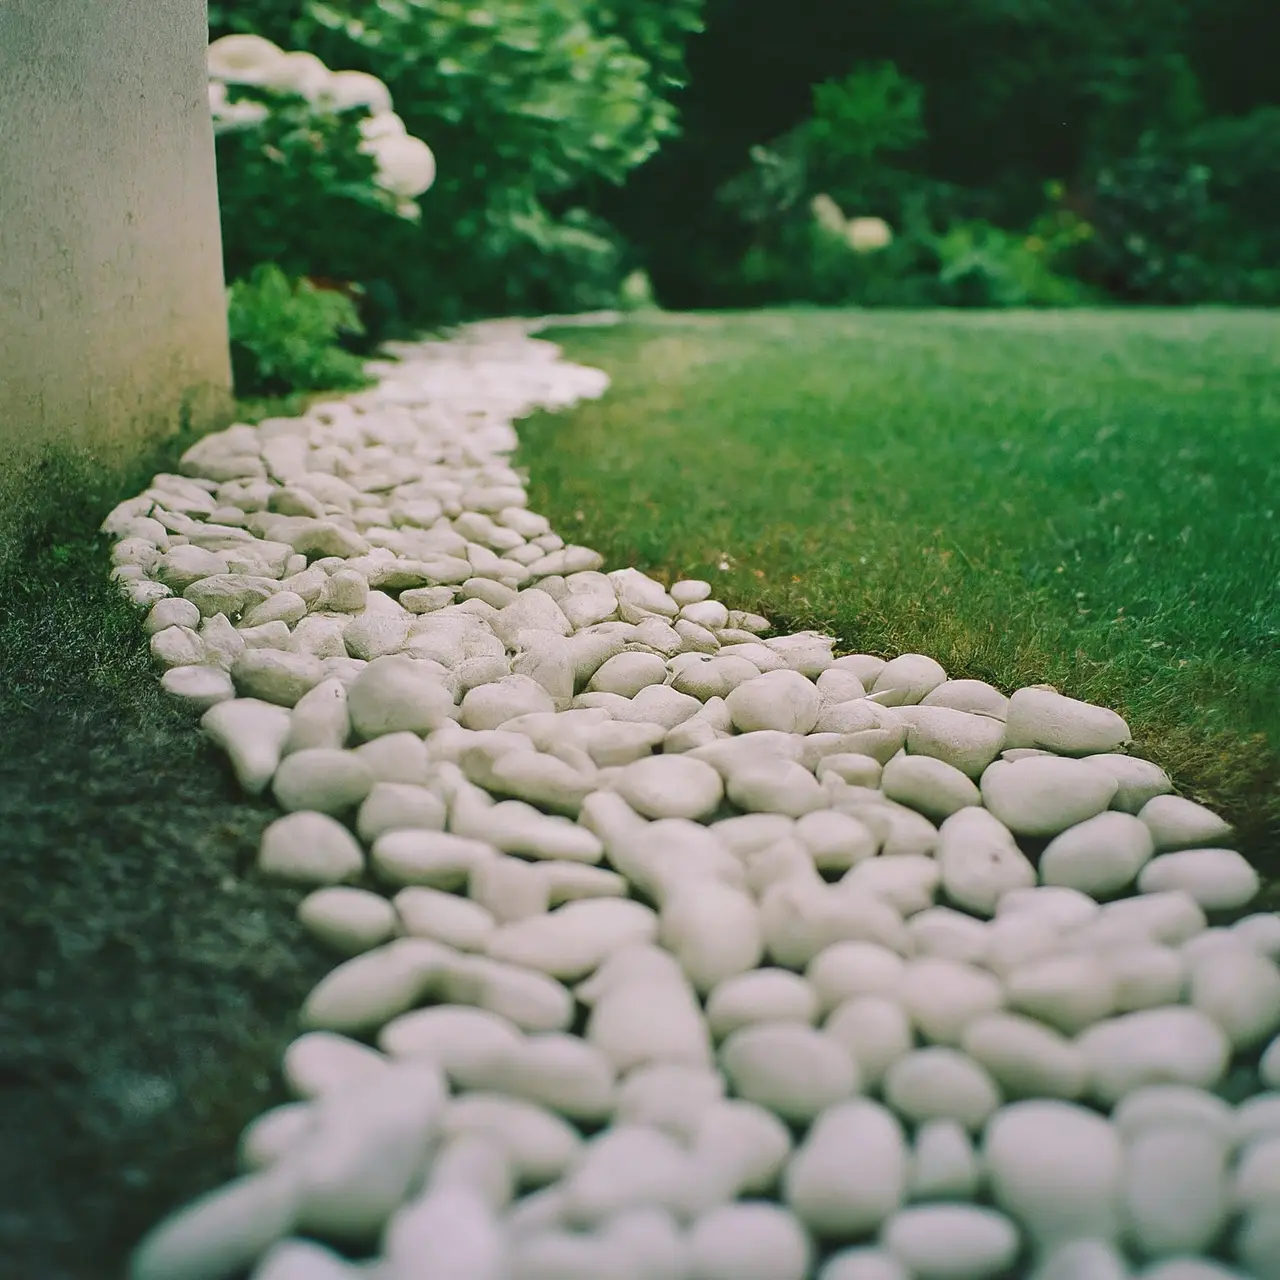 A garden path lined with snow white pebbles. 35mm stock photo